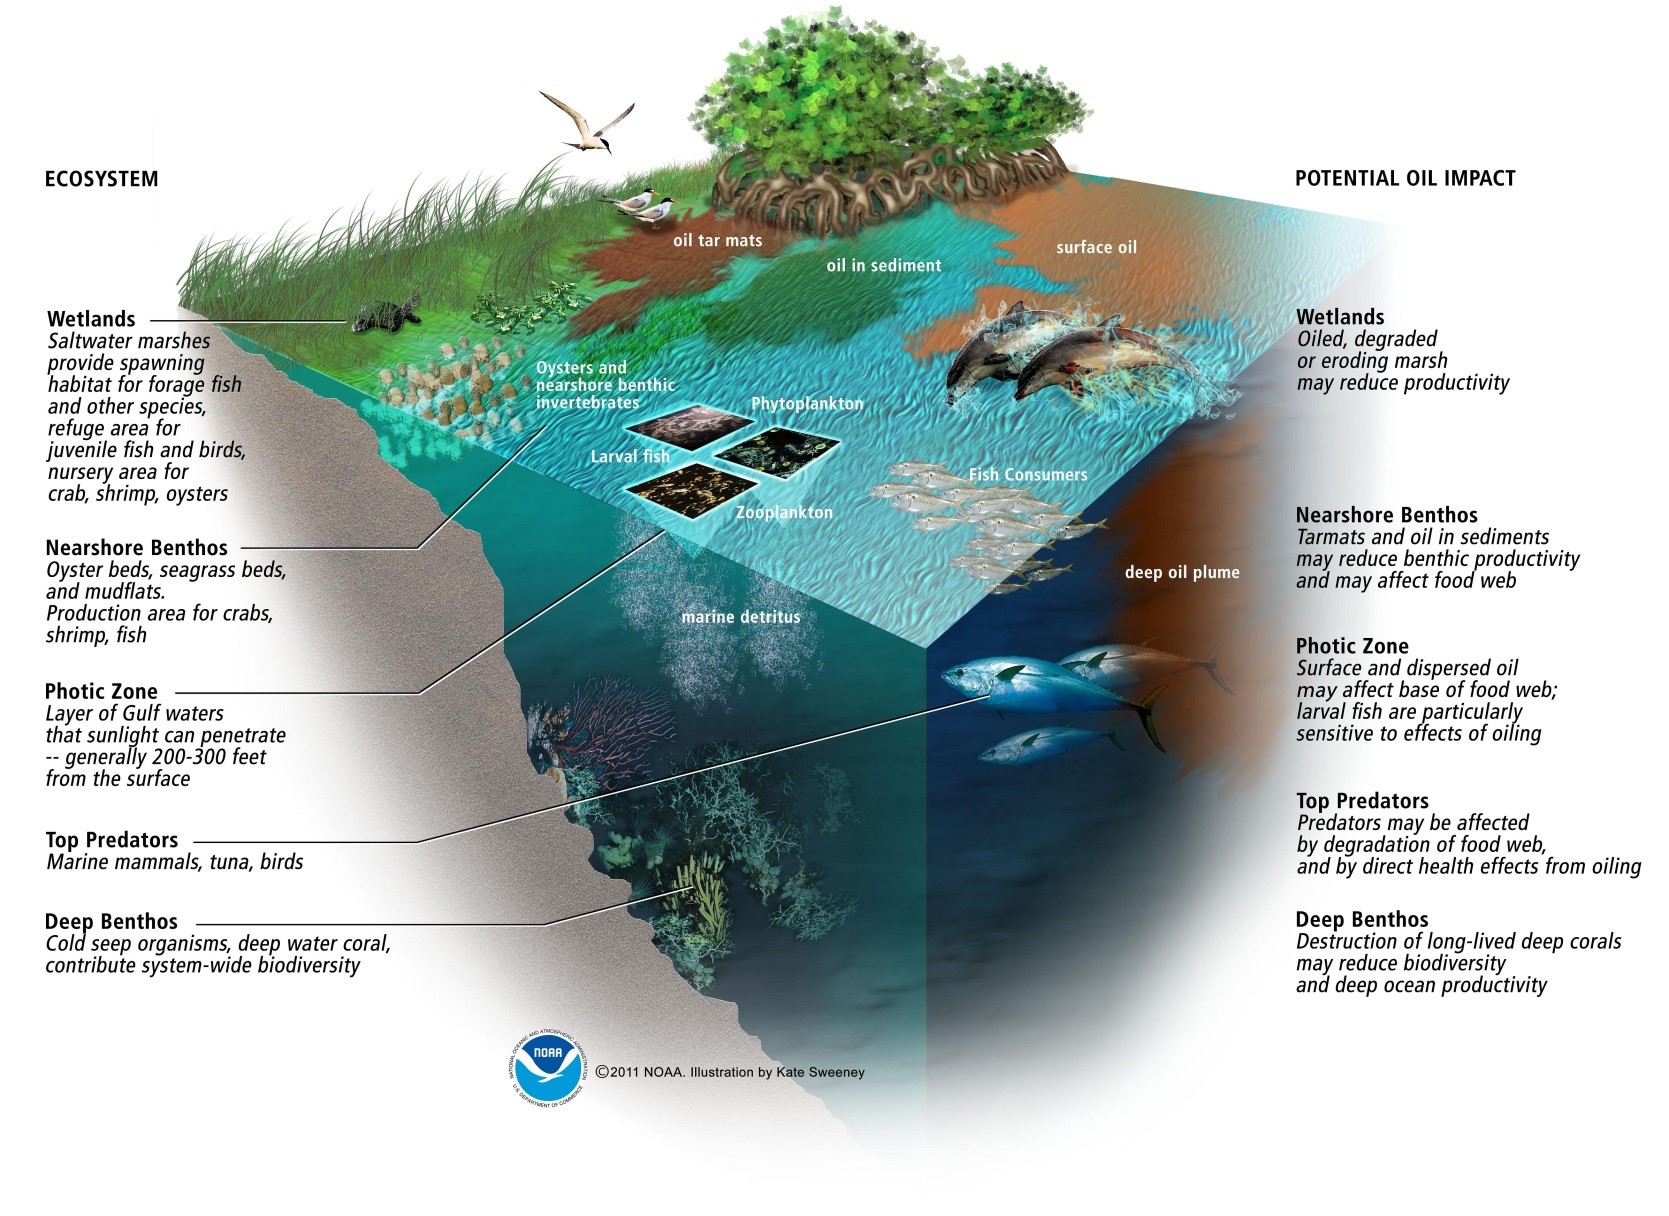 An infographic depicting an ecosystem with oil impacting various areas. 